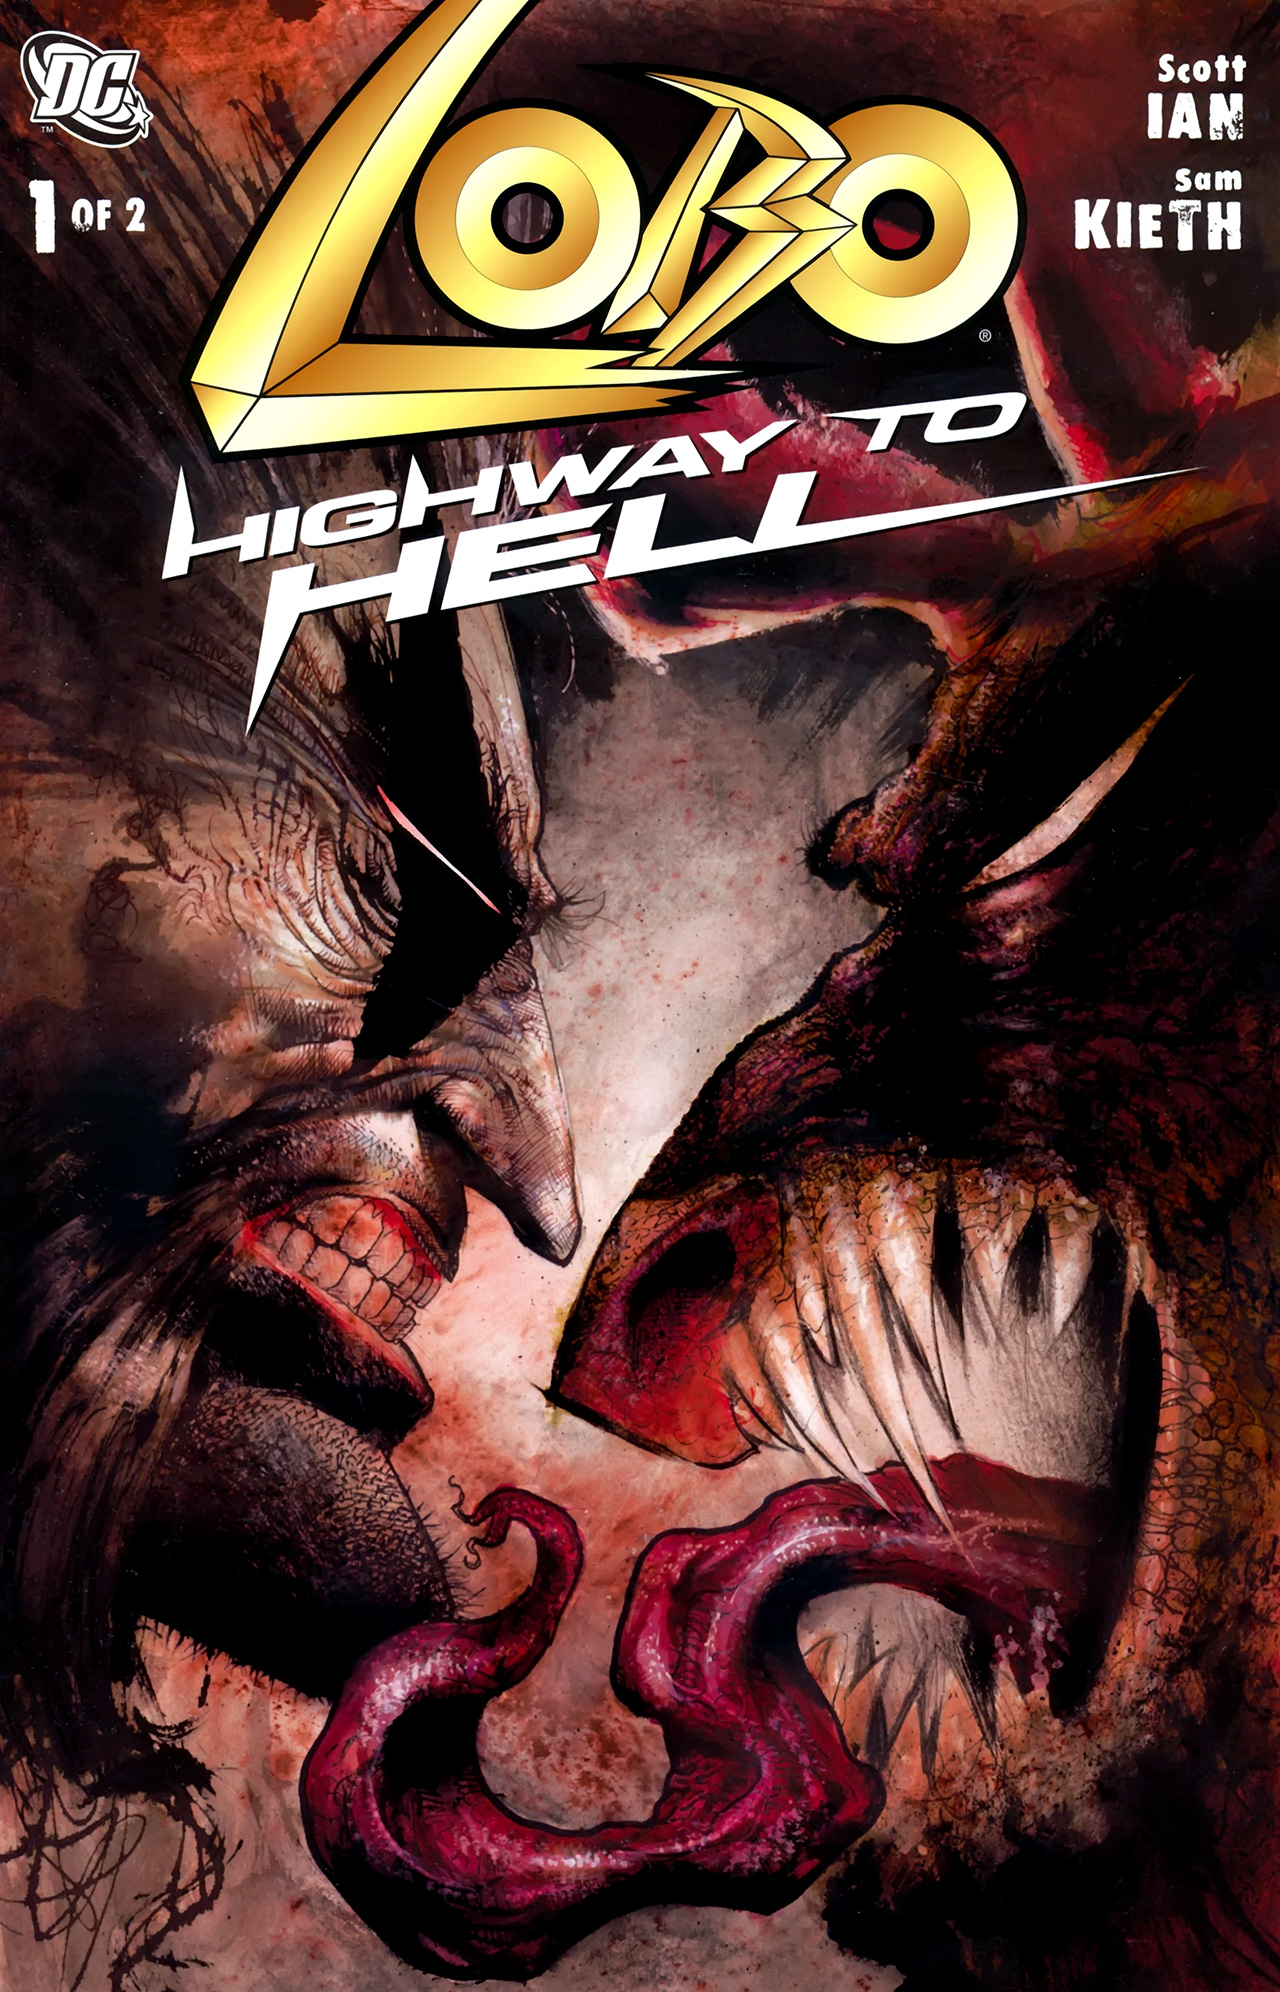 Read online Lobo: Highway to Hell comic -  Issue #1 - 1